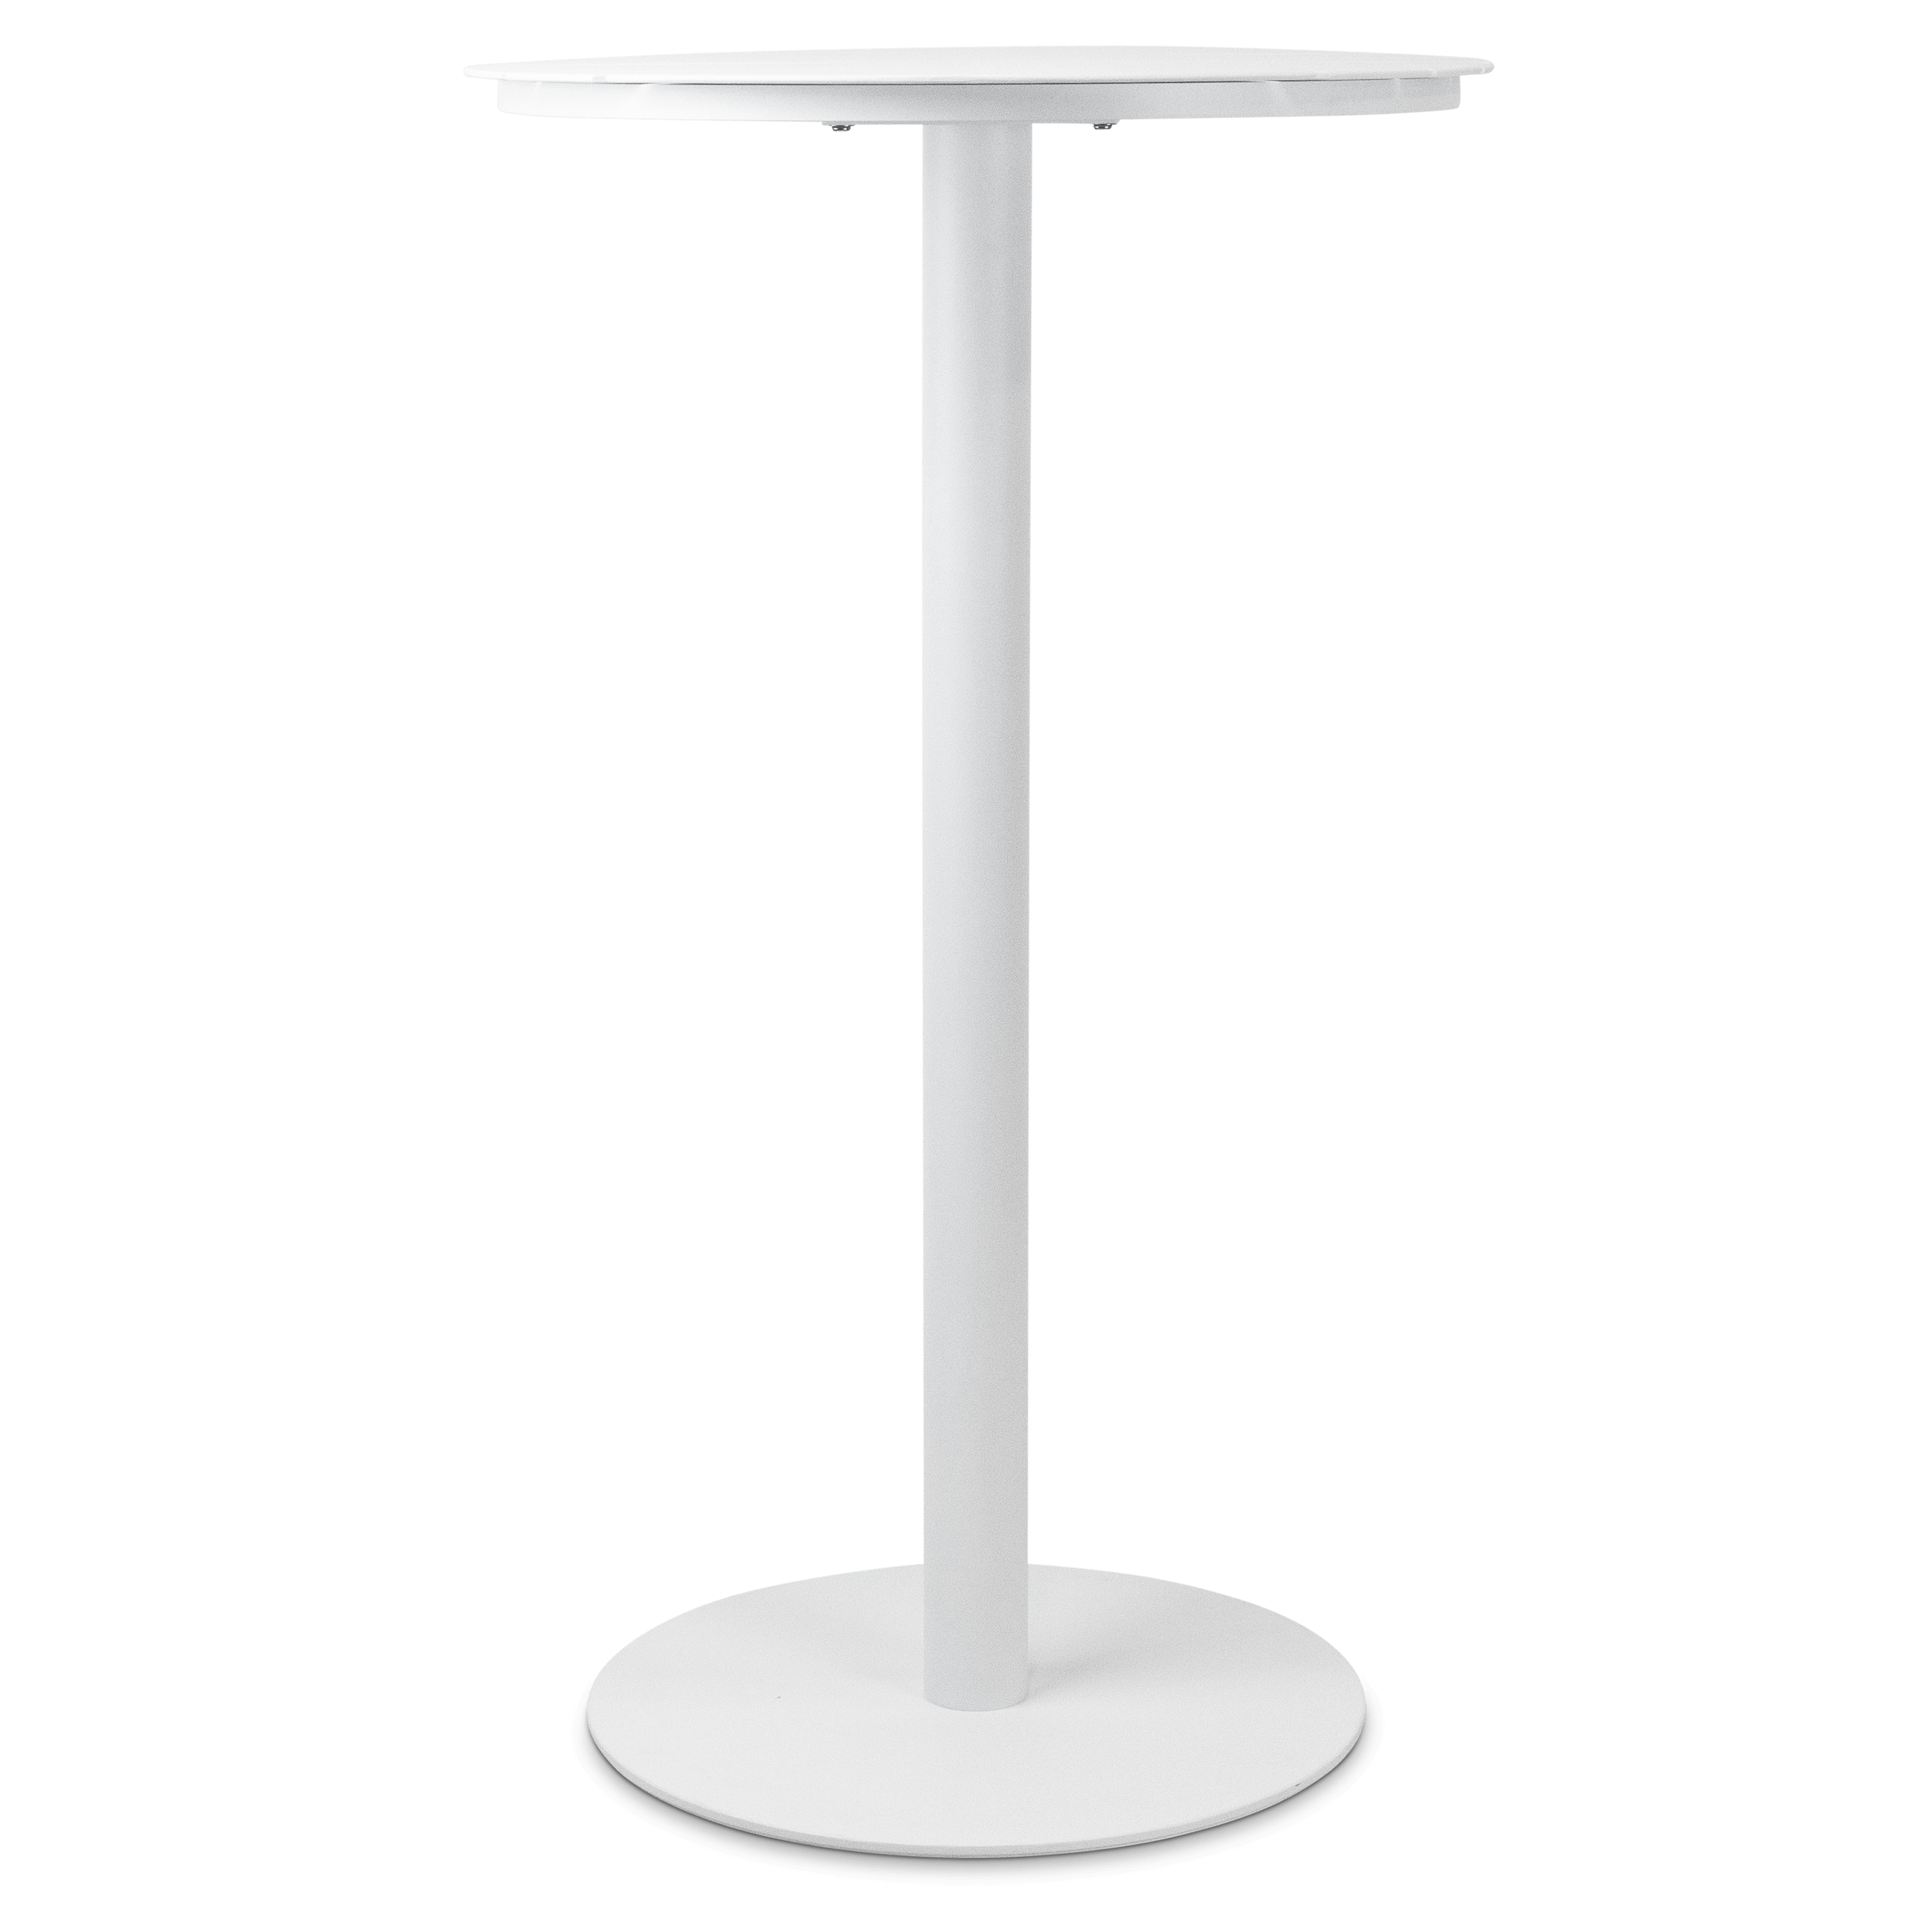 Cafe Collection Round Bar Table in Aluminium and Steel Base in Arctic White